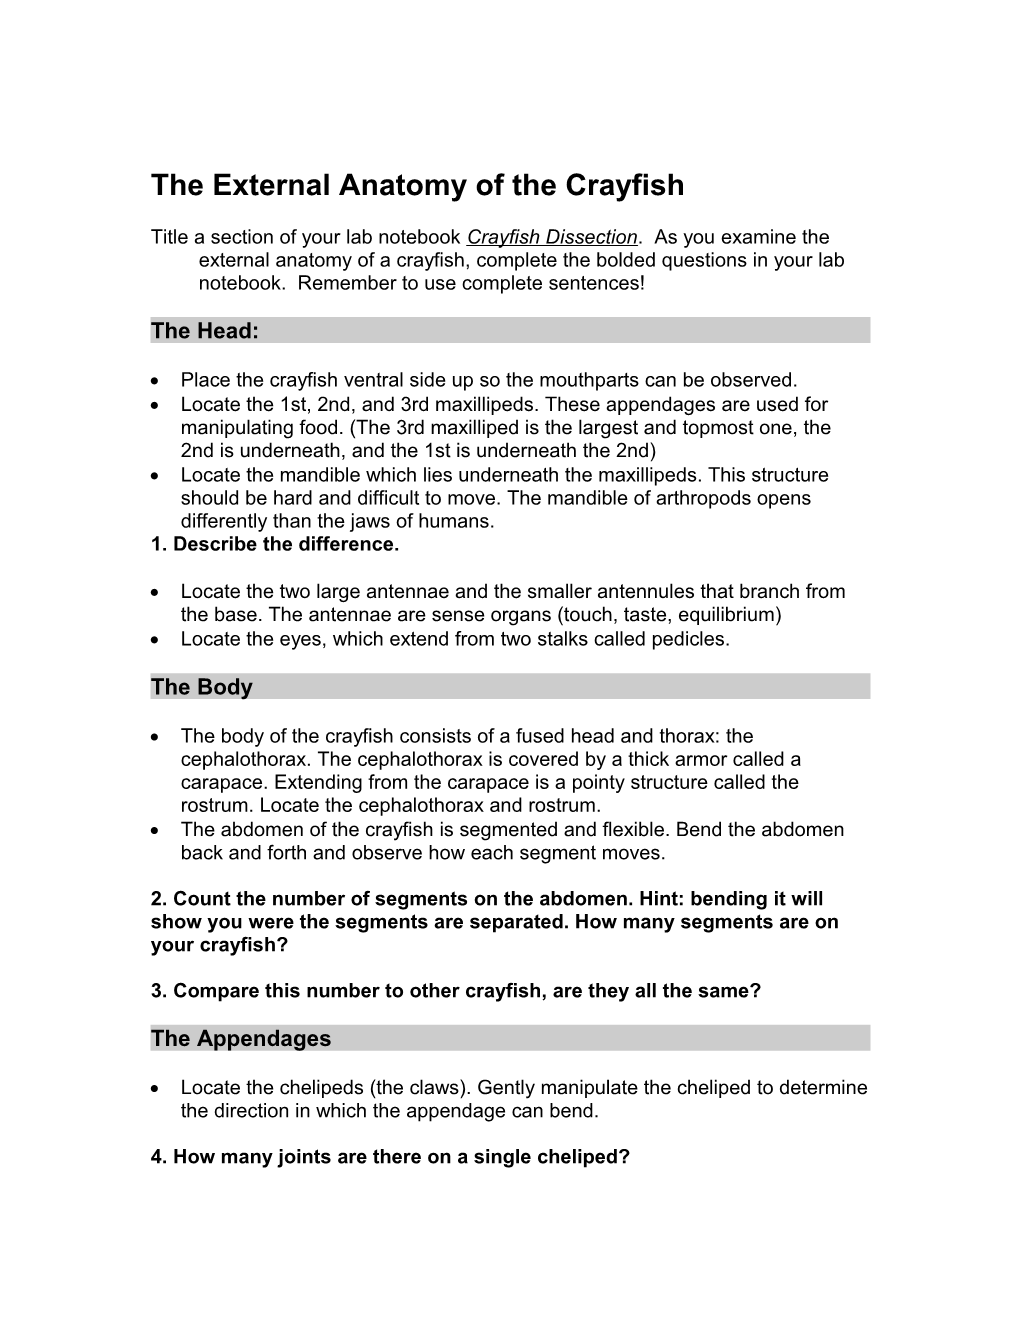 The External Anatomy of the Crayfish